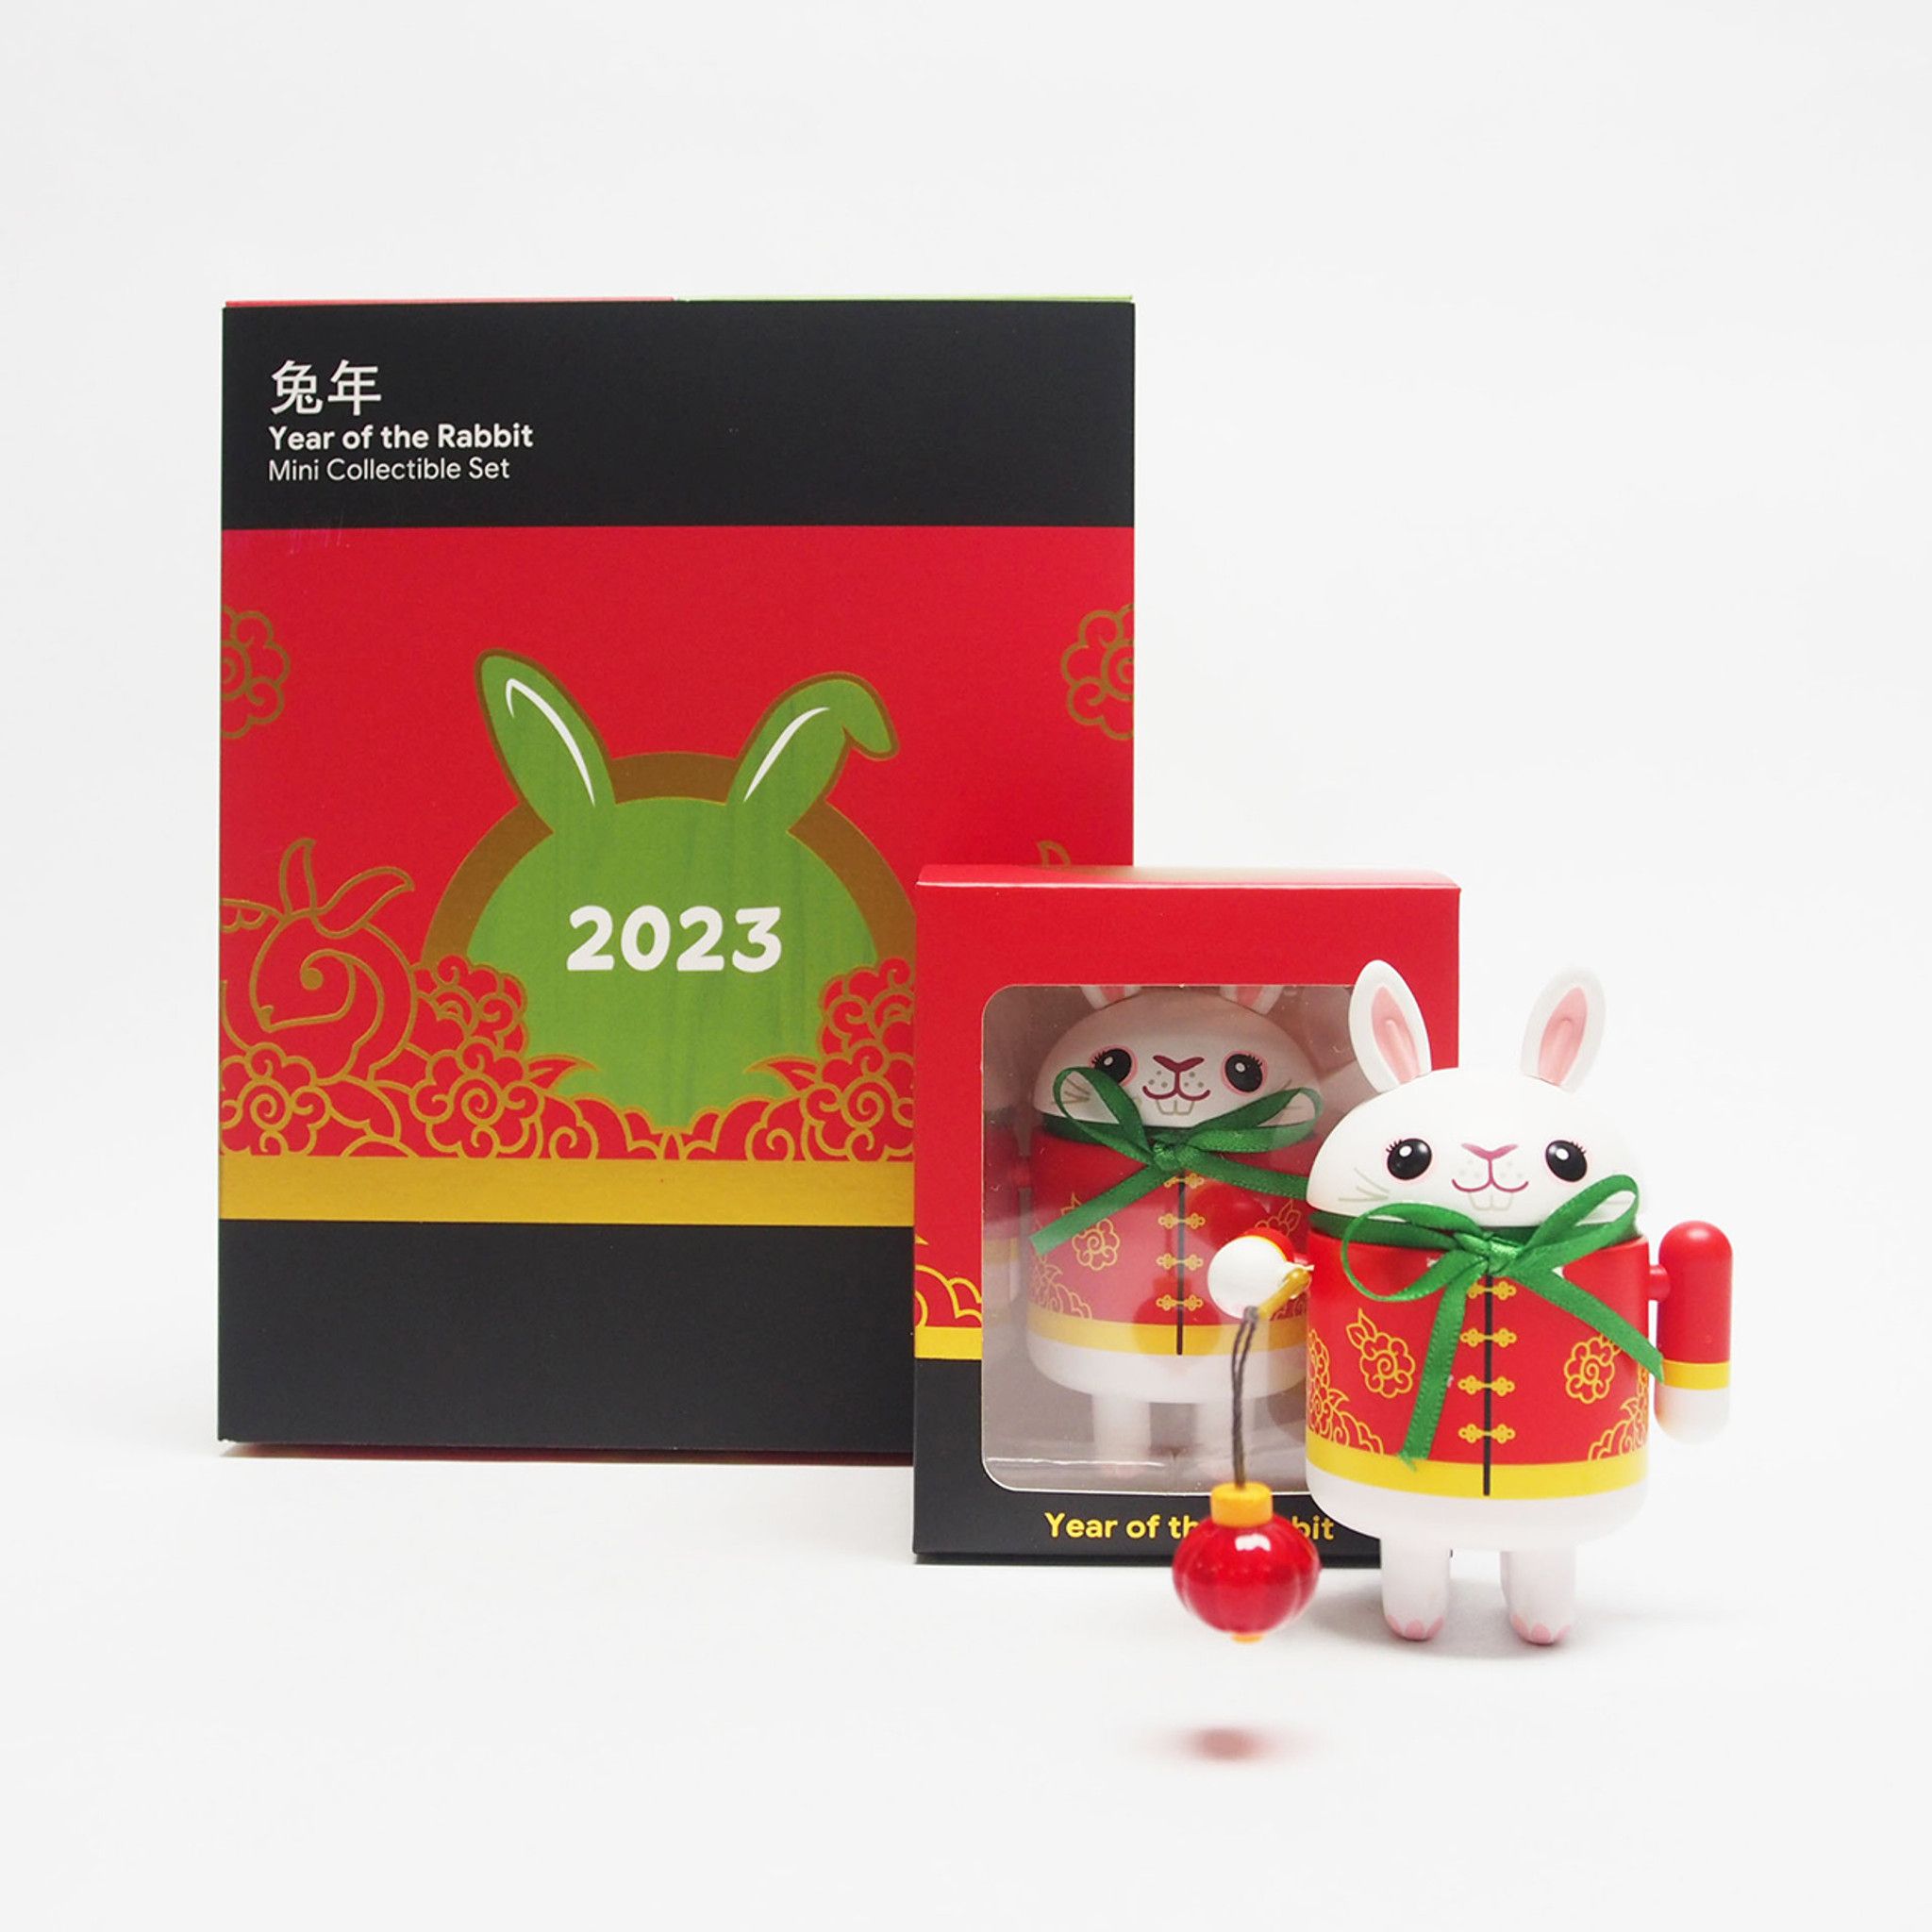 Dead Zebra's Year of the Rabbit Android collectible set rabbit